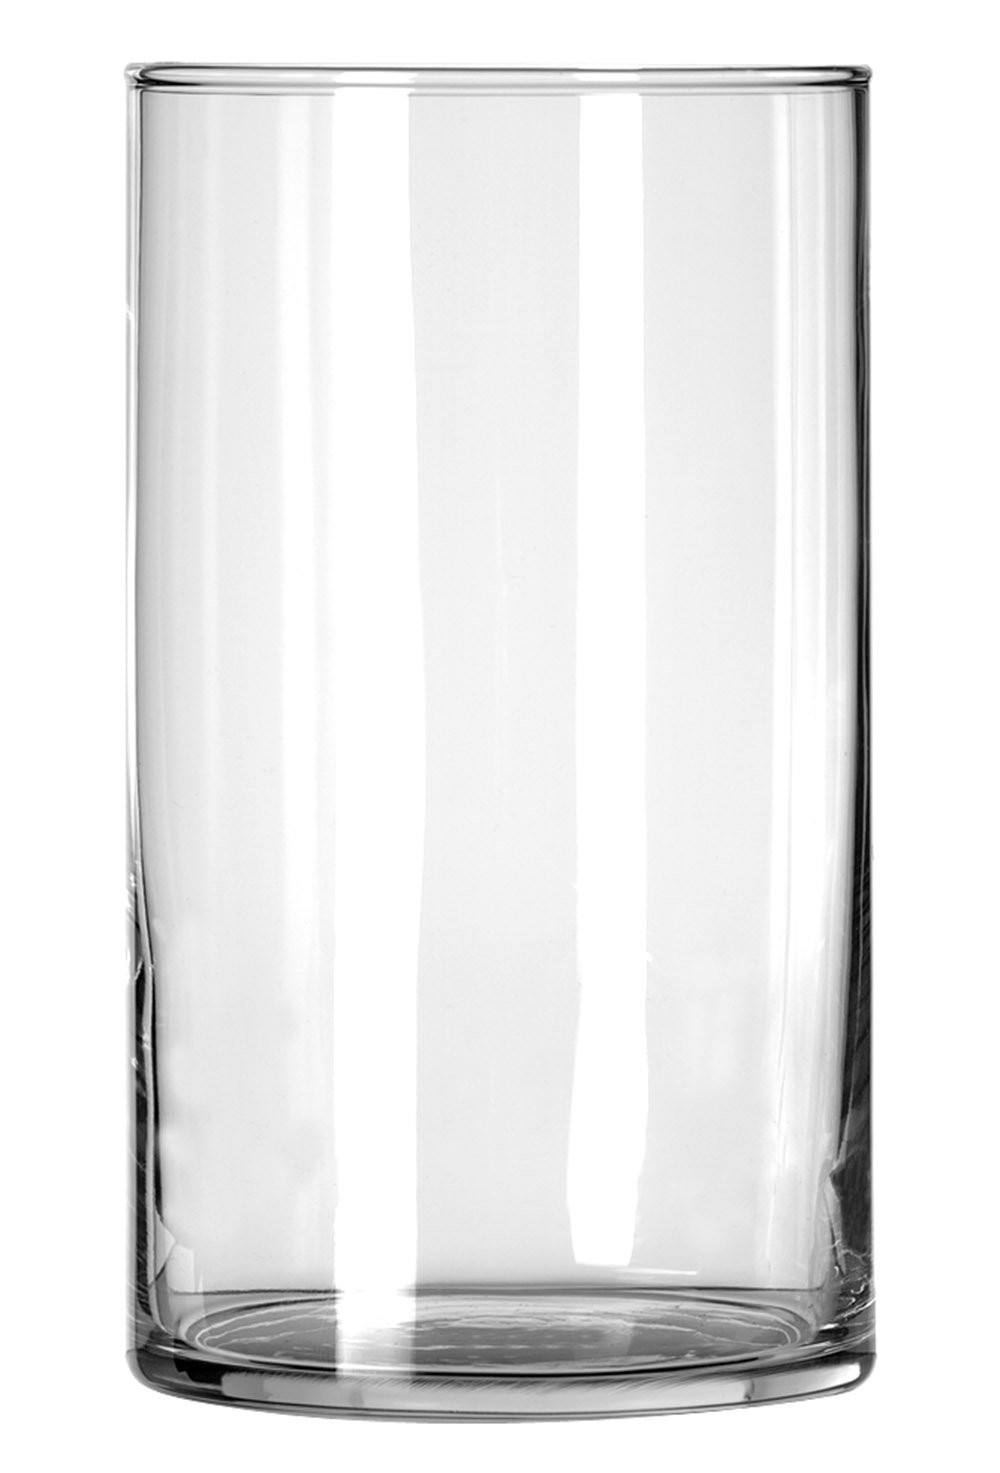 23 attractive Eastland Glass Cylinder Vases Set Of 4 2024 free download eastland glass cylinder vases set of 4 of amazon com richland glass bud vase clear teardrop set of 12 health in libbey cylinder vase 6 inch clear set of 12